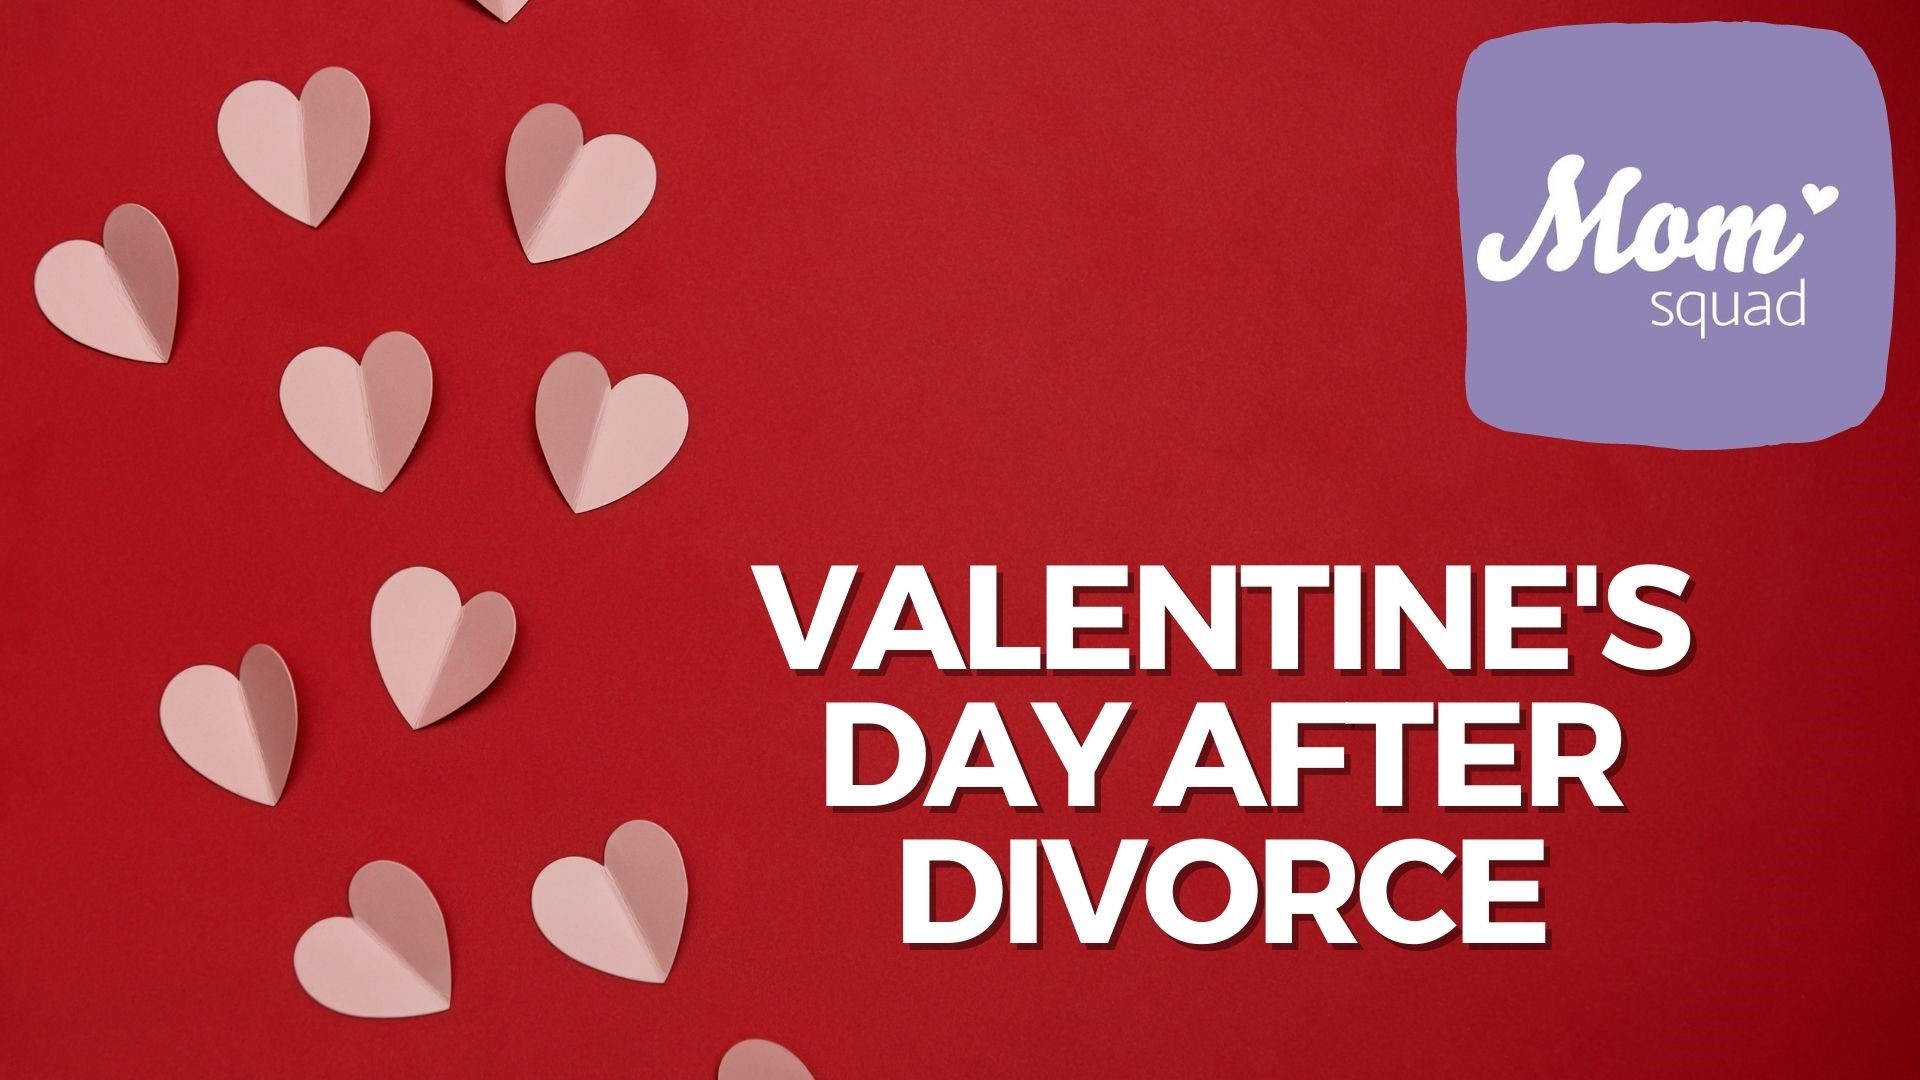 WKYC's Maureen Kyle speaks with Dr. Neeta Bhushan on how to navigate Valentine's Day after relationships.